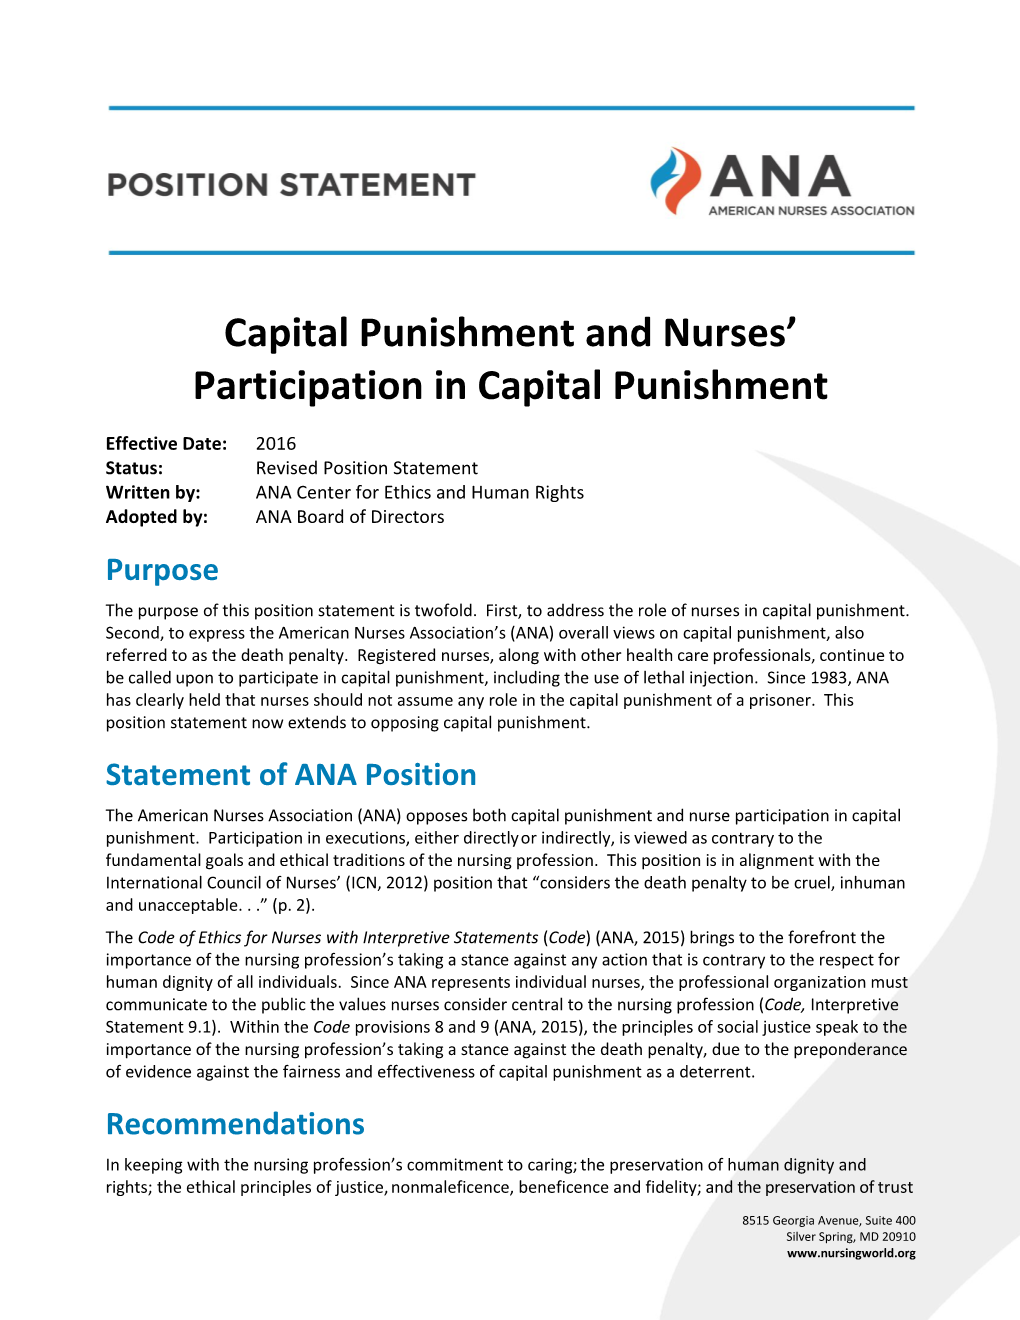 Opposes Both Capital Punishment and Nurse Participation in Capital Punishment